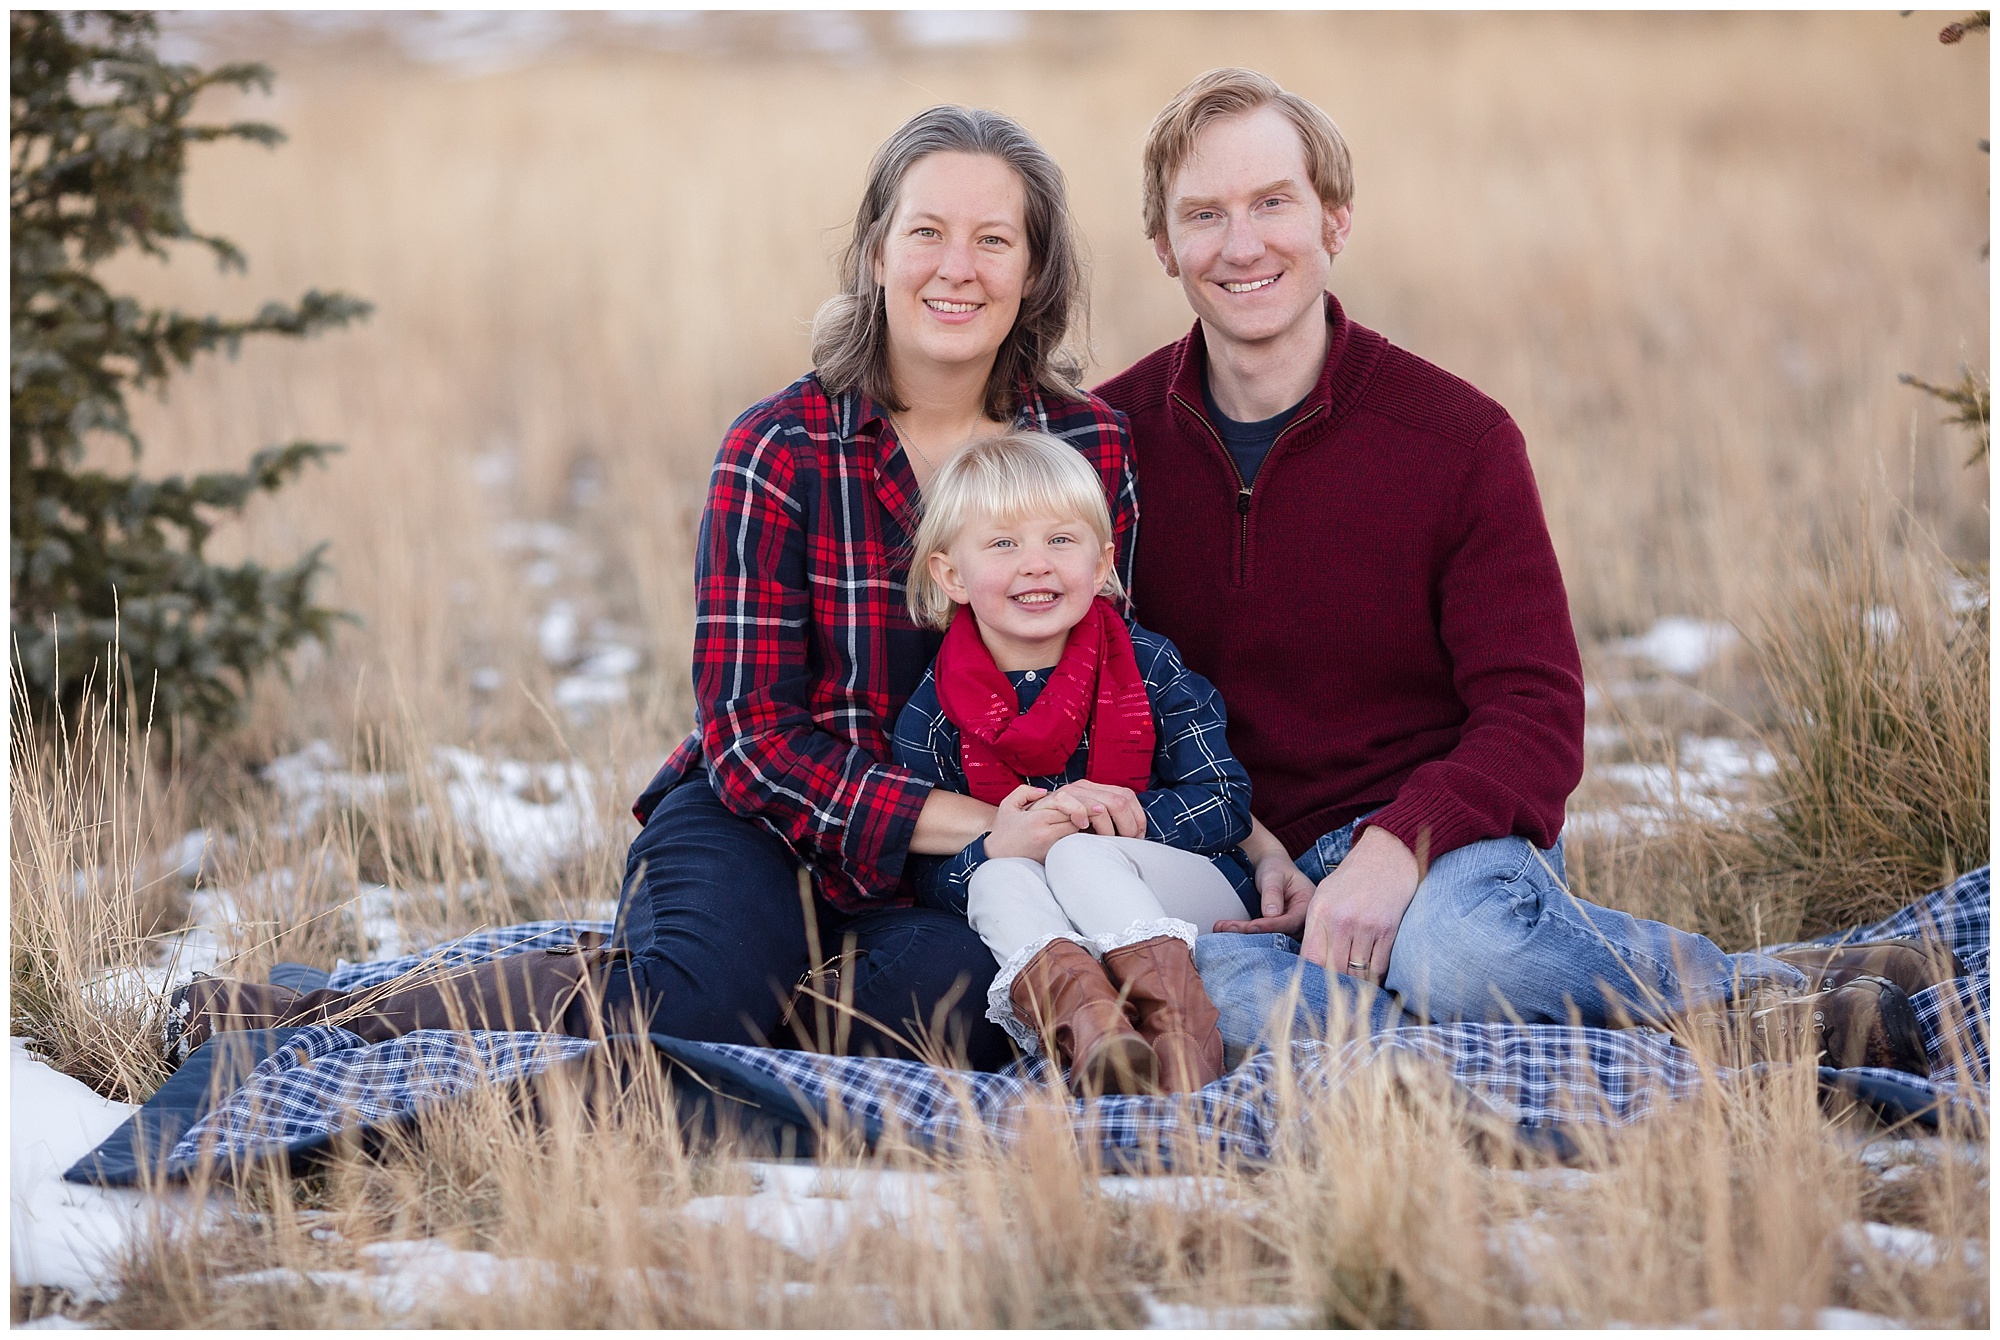 Family sits together on a blanket during their winter family photos.